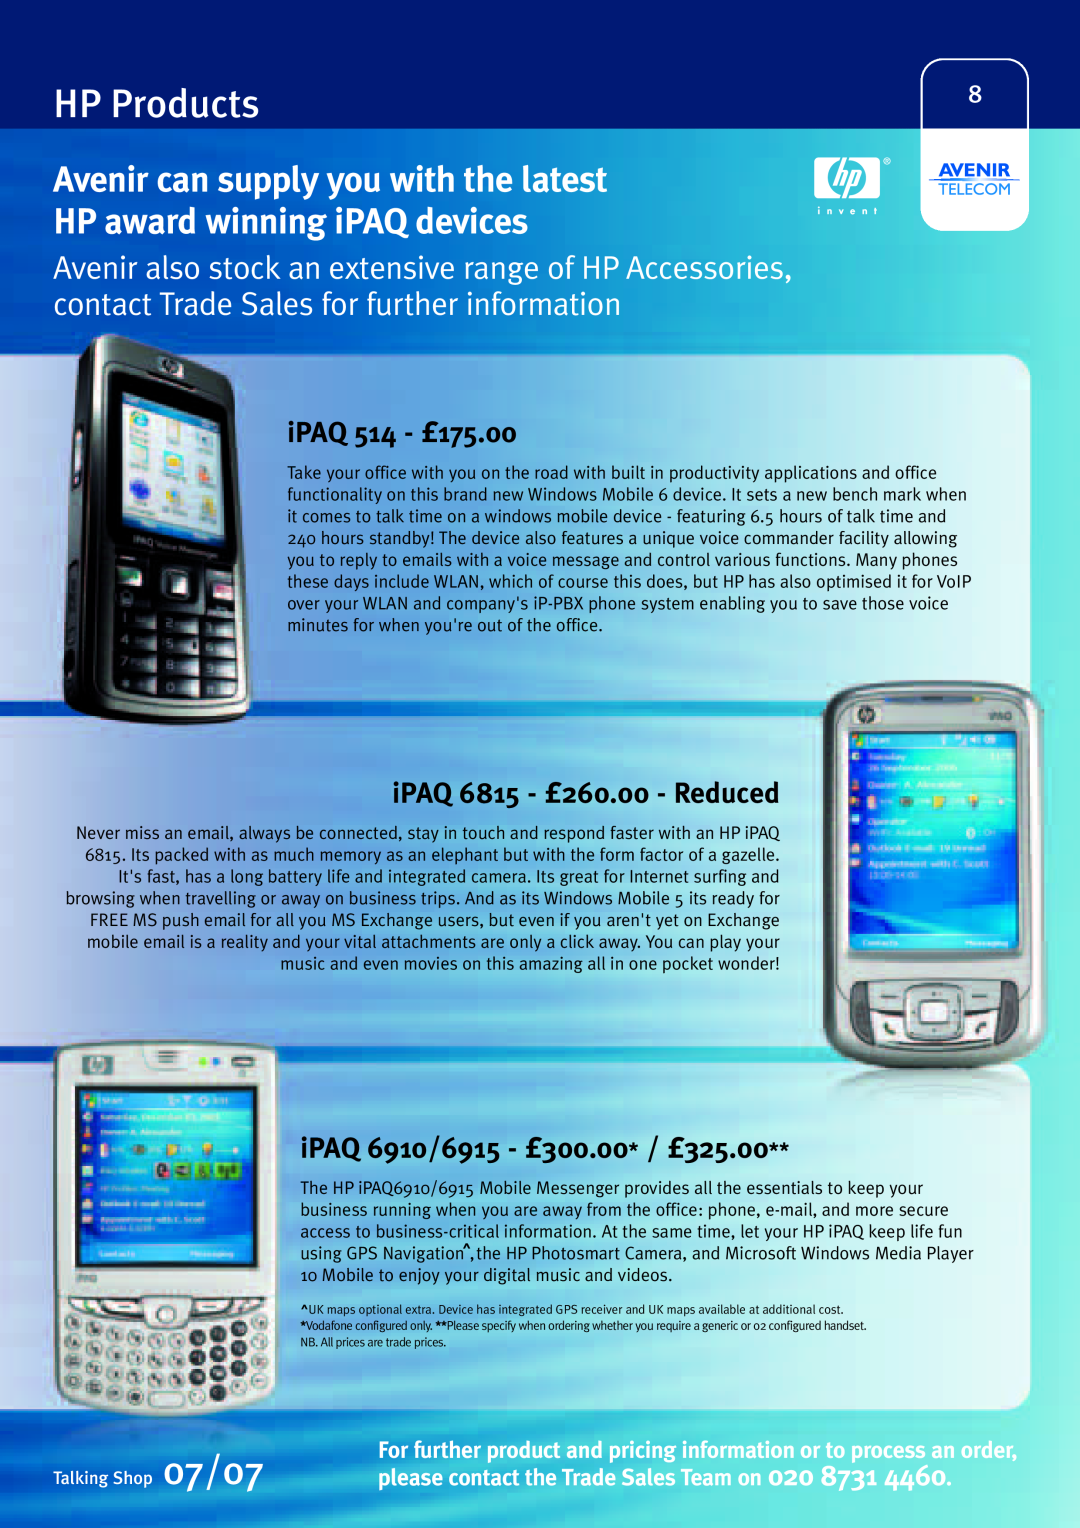 Sony Ericsson W580i HP Products, Avenir can supply you with the latest HP award winning iPAQ devices, iPAQ 514 - £175.00 